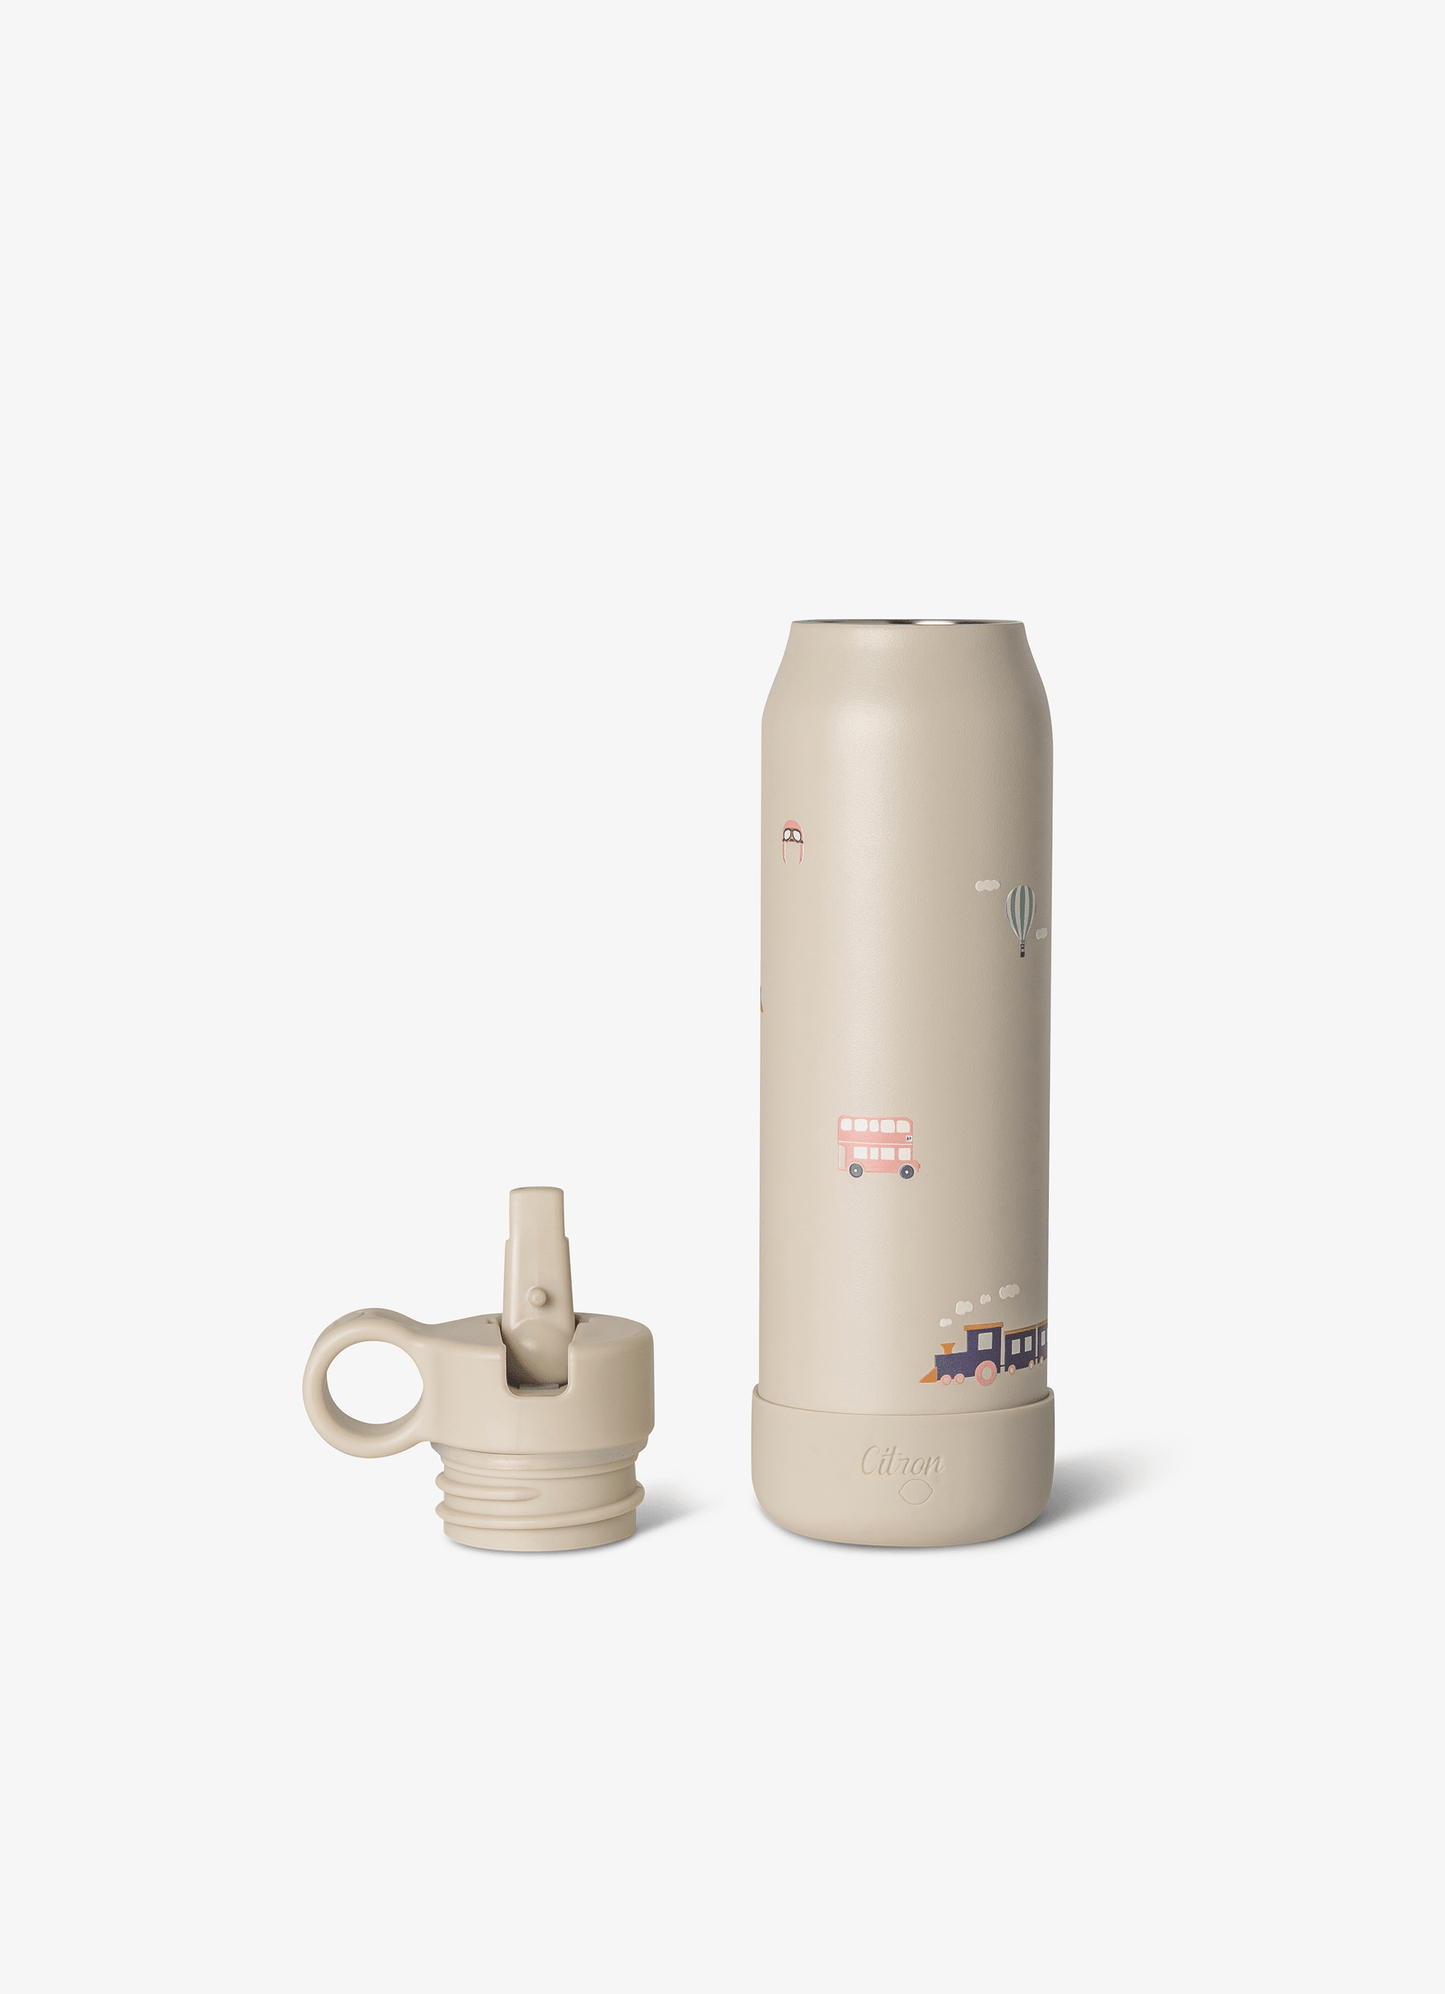 Small Water Bottle - 350ml - Vehicles